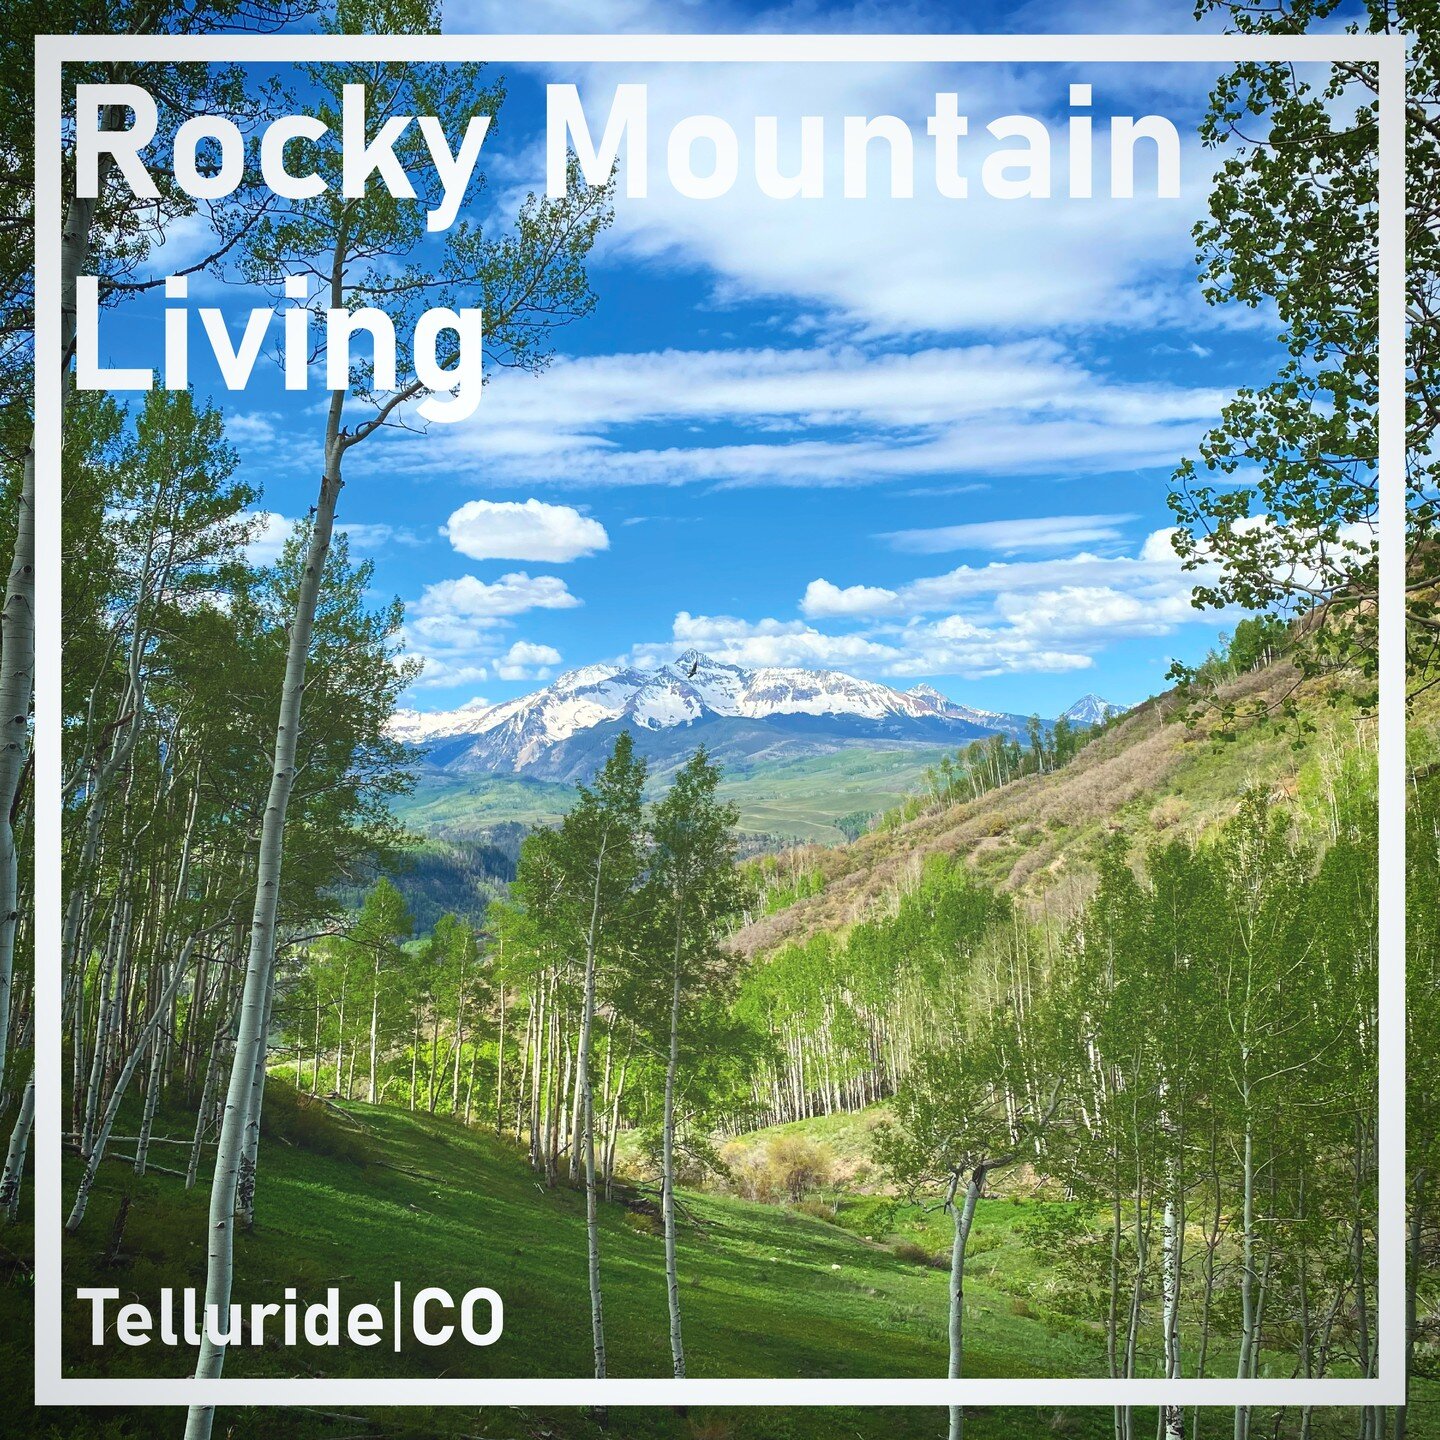 Set in the picturesque San Juan Mountains, Telluride is known for its world-class skiing, idyllic downtown and summertime festivals.

LVF is working with some of our favorite collaborators, @marsden.architects &amp; @wc3_design, to realize a site des